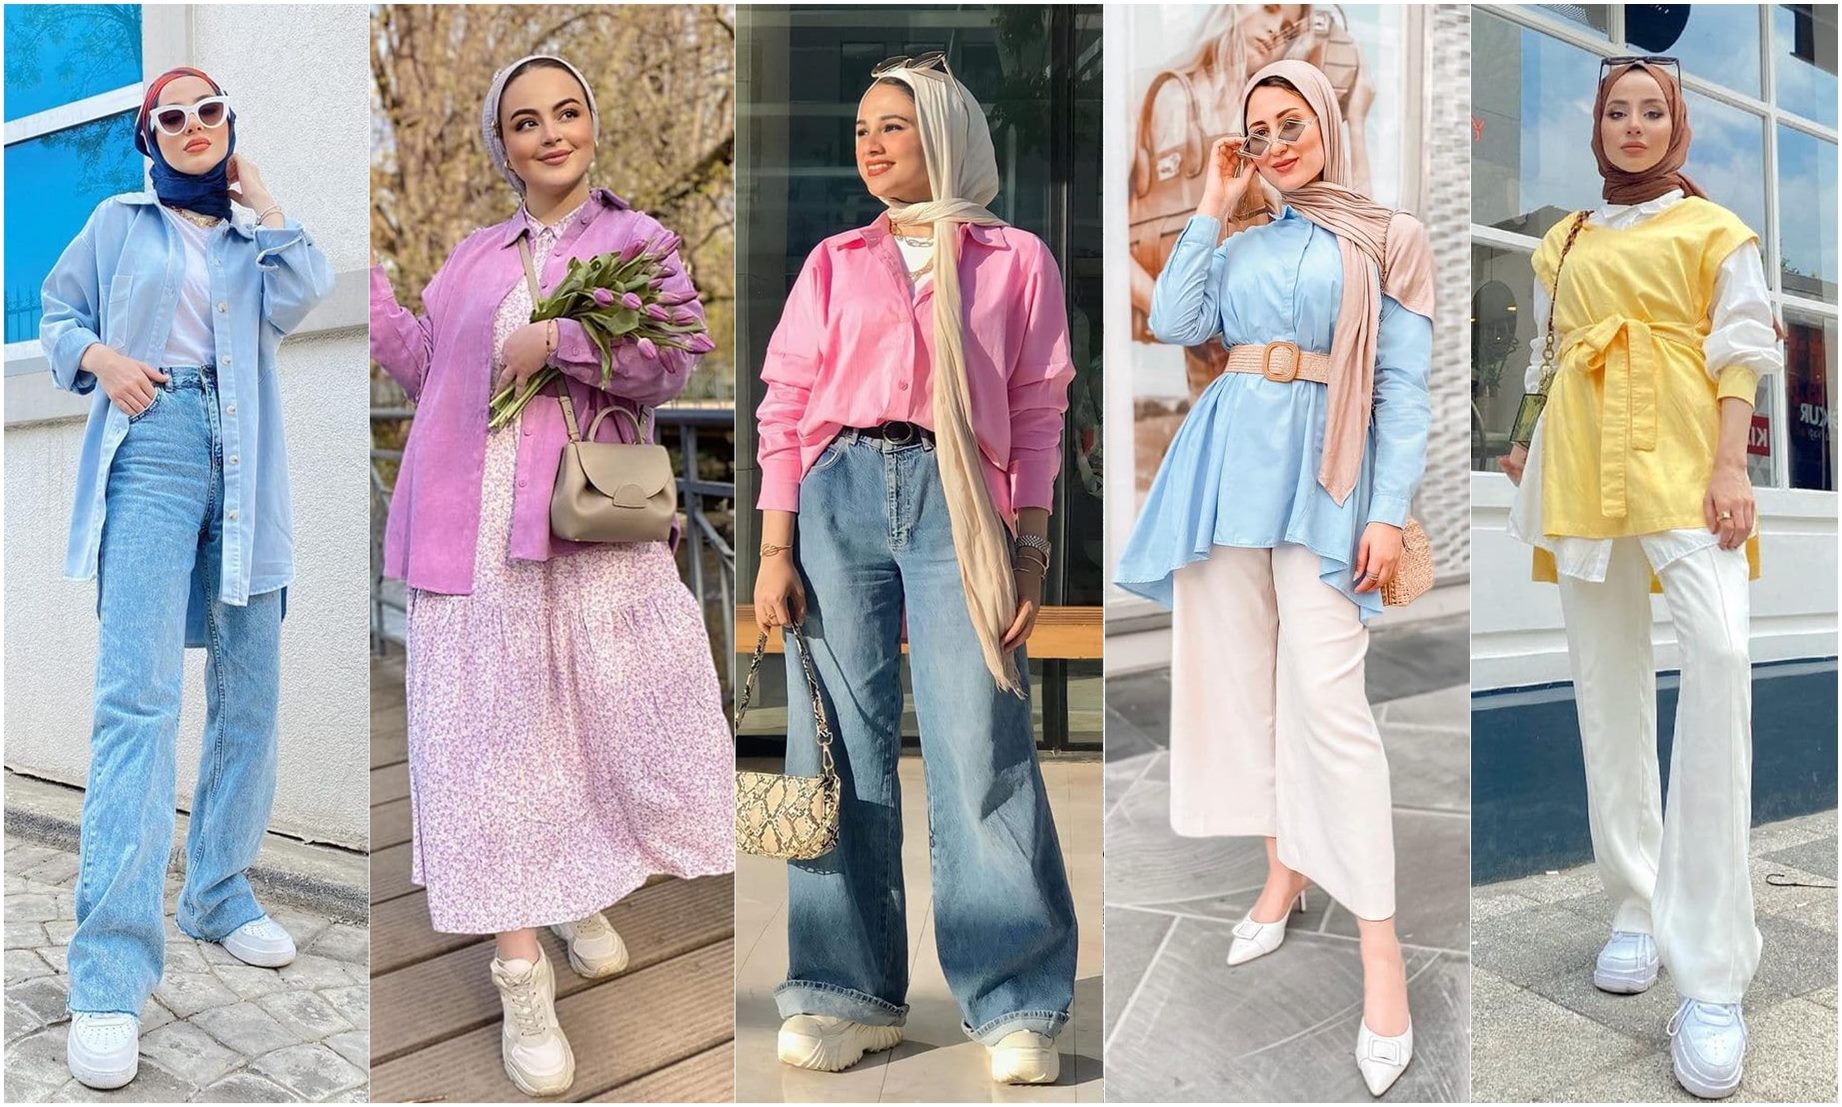 15 Looks That Prove Brown Pants Add So Much Style - Hijab Fashion